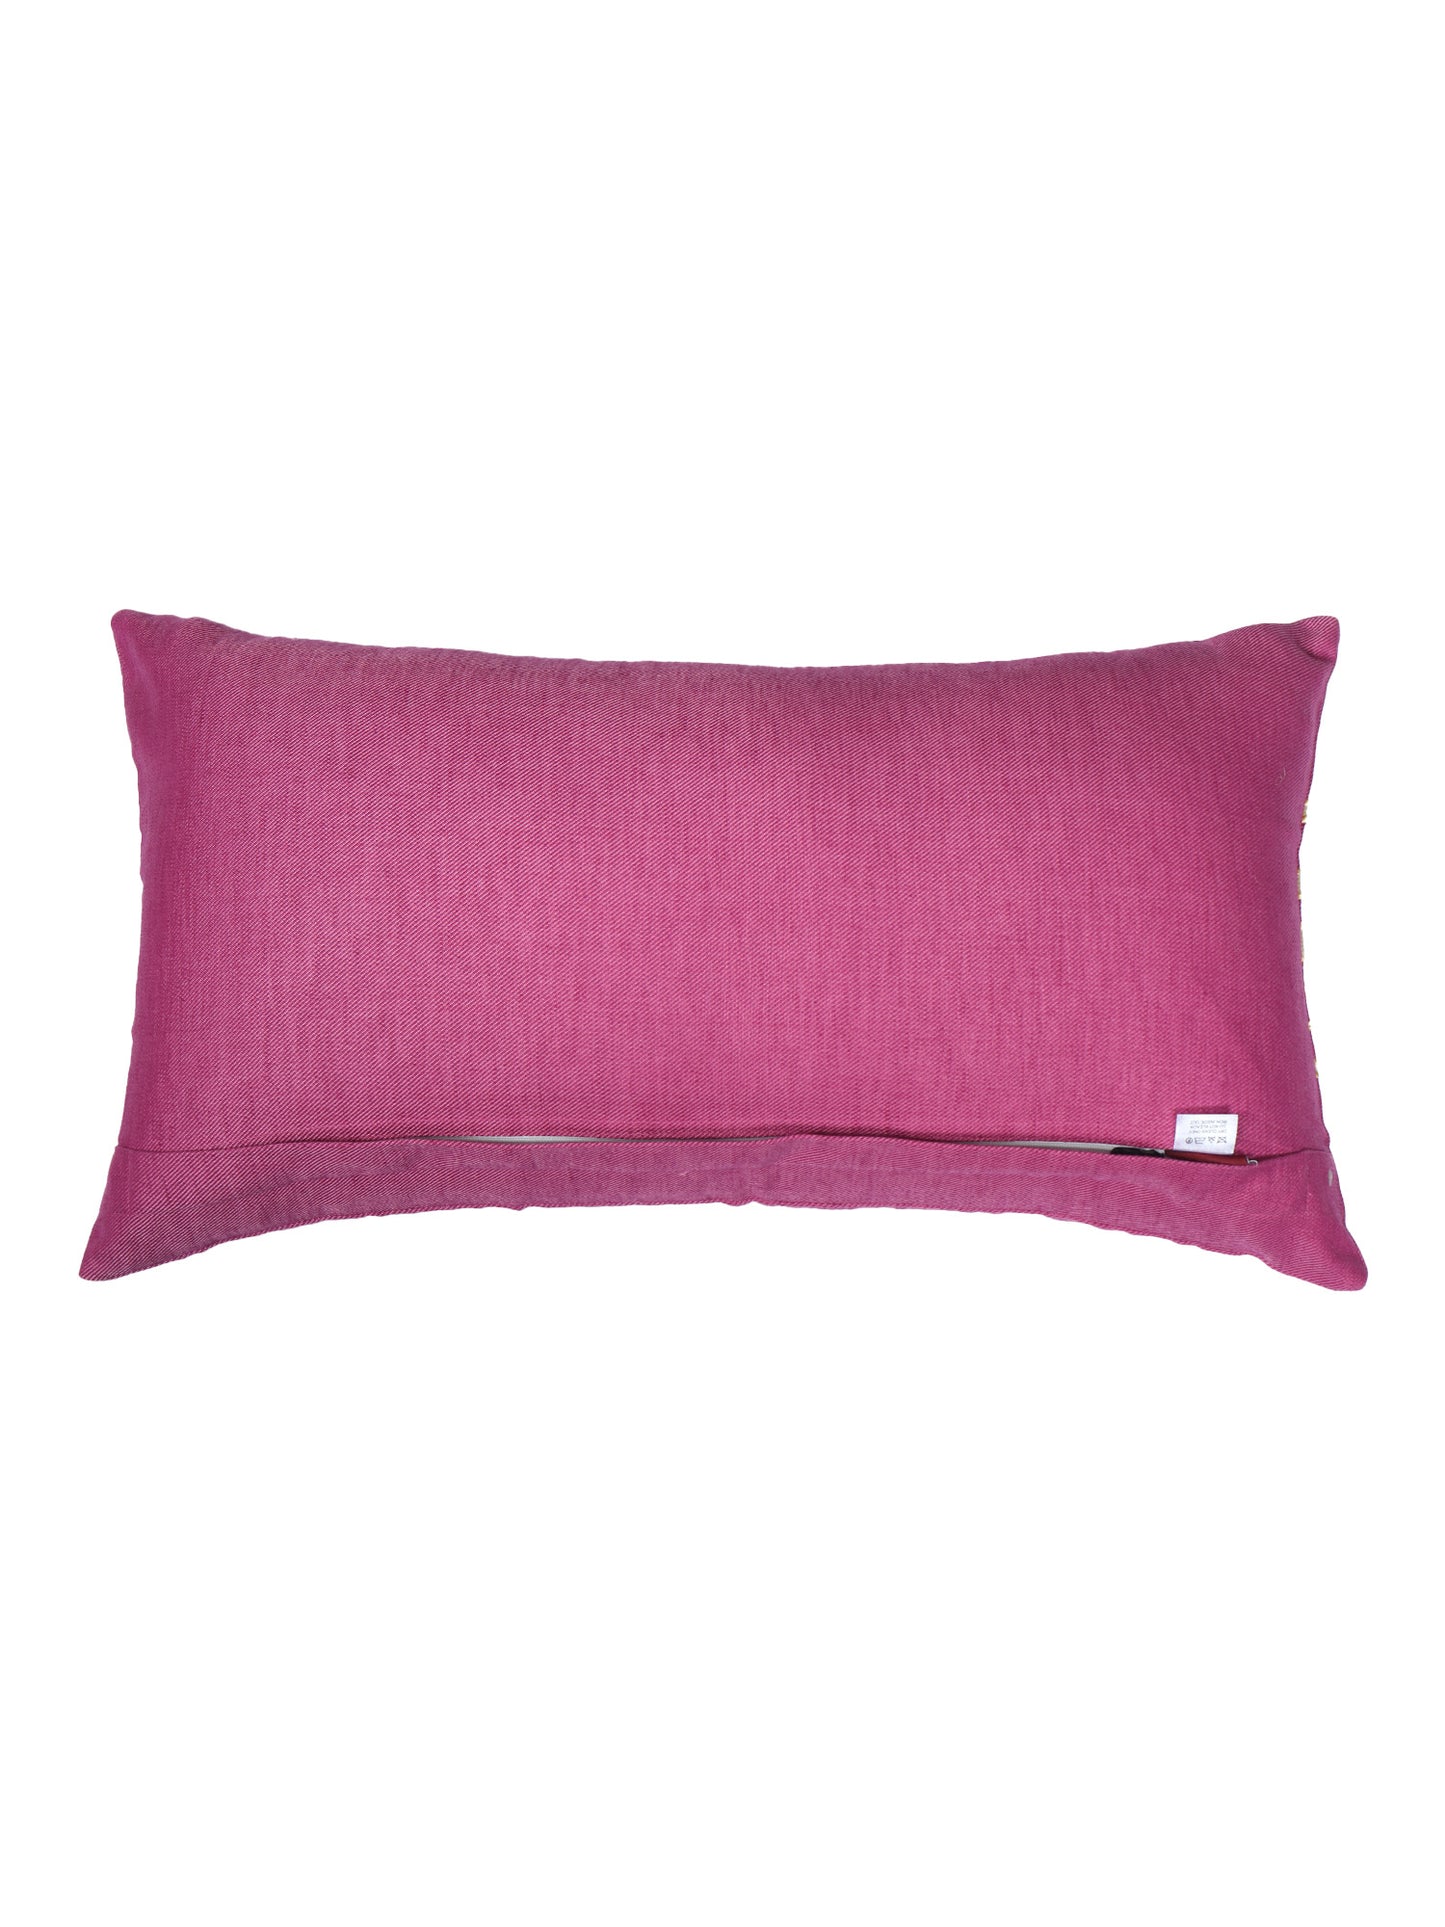 Rectangular Cushion Cover - Luxe Collection | Sofa, Bedroom, Couch | Polycanvas Floral Applique - Magenta Pink - 12x22 inch (30x55 cms) (Pack of 1)